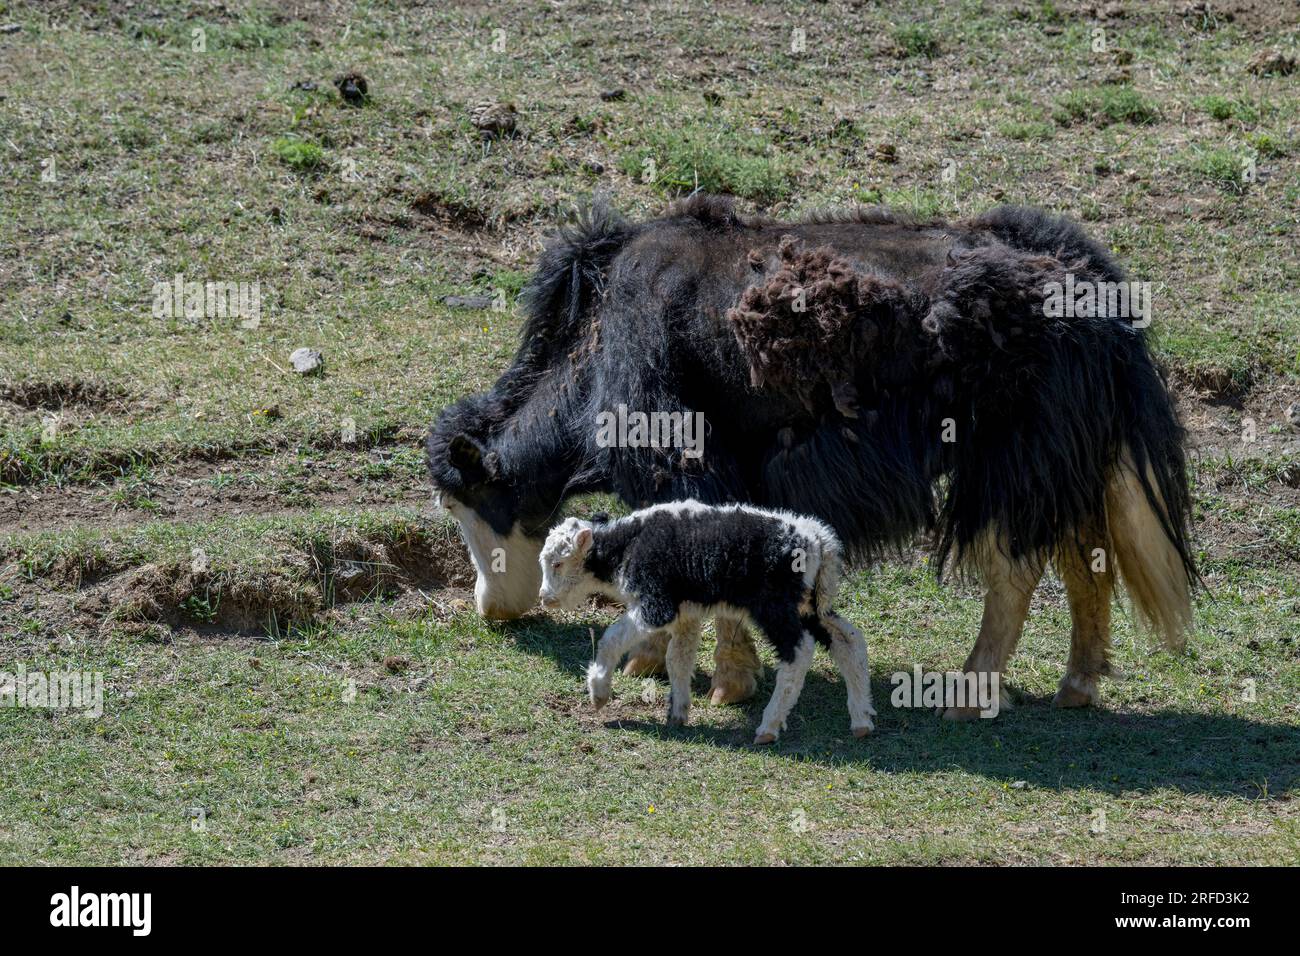 A Yak mother and a newly born baby in the Yolyn Am (Gurvan Saikhan National Park), a deep and narrow gorge in the Gurvan Saikhan Mountains near Dalanz Stock Photo